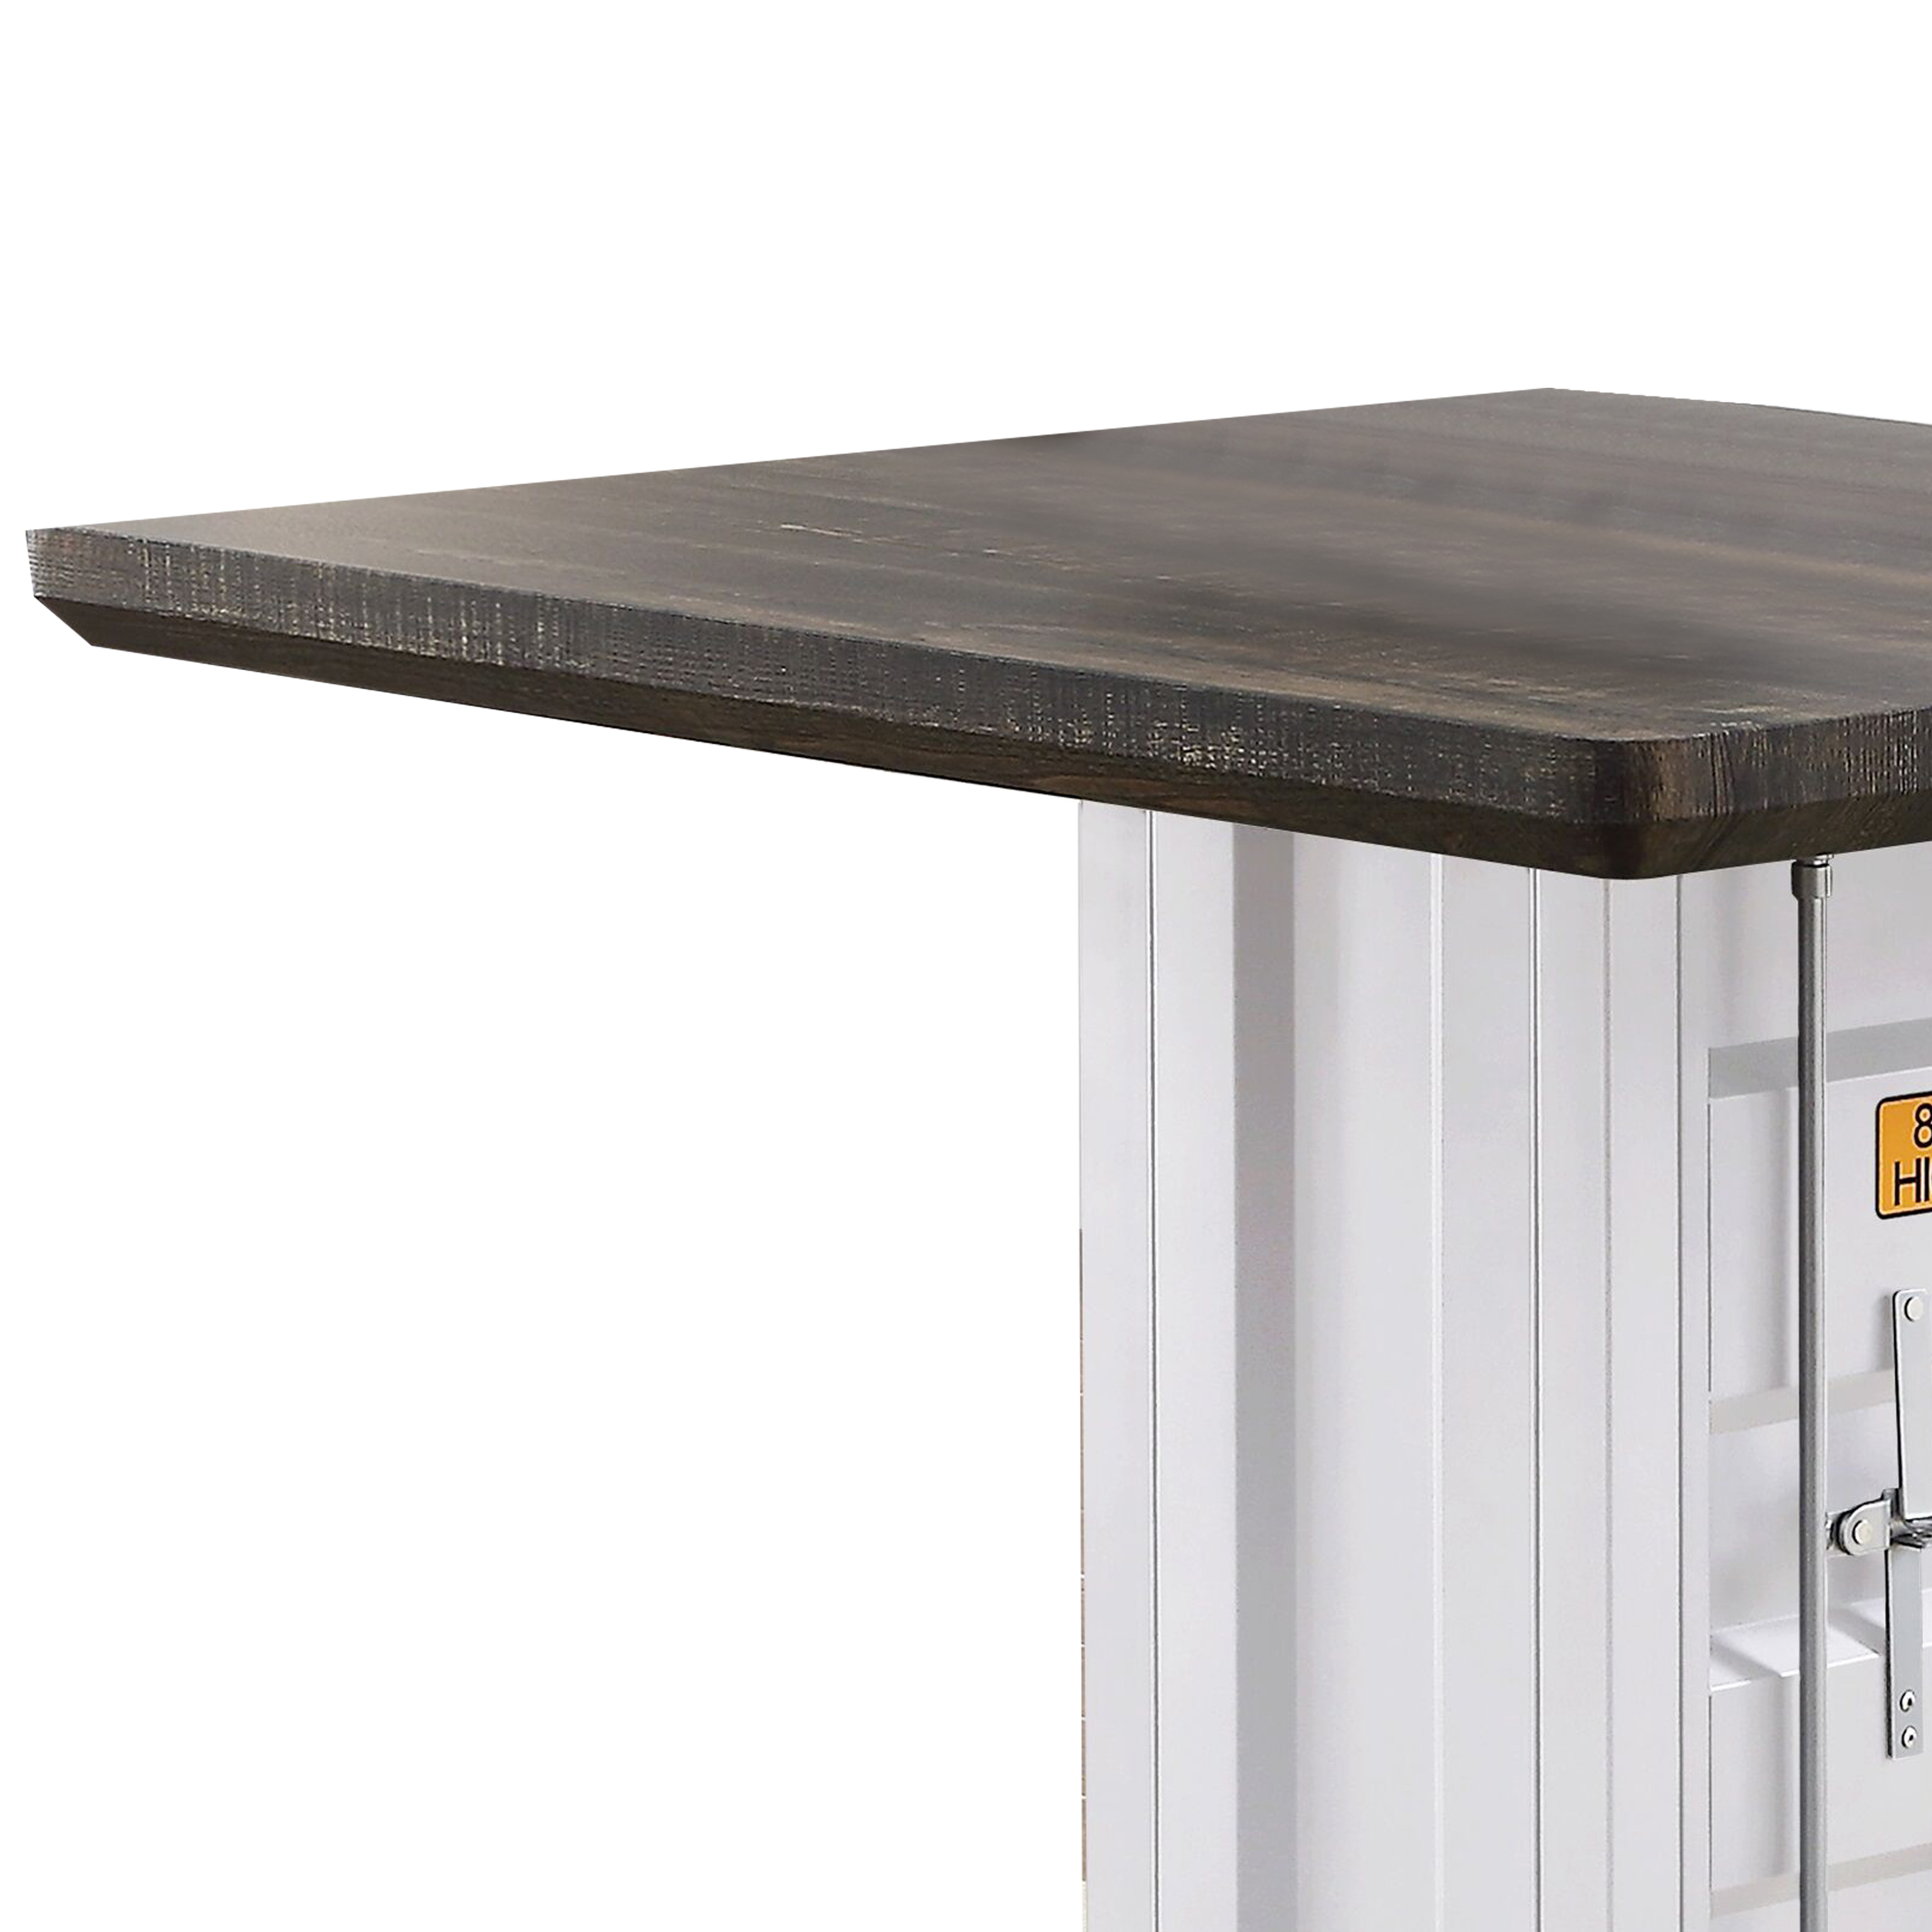 Square Counter Height Table With Recessed Pedestal Base, White And Brown- Saltoro Sherpi